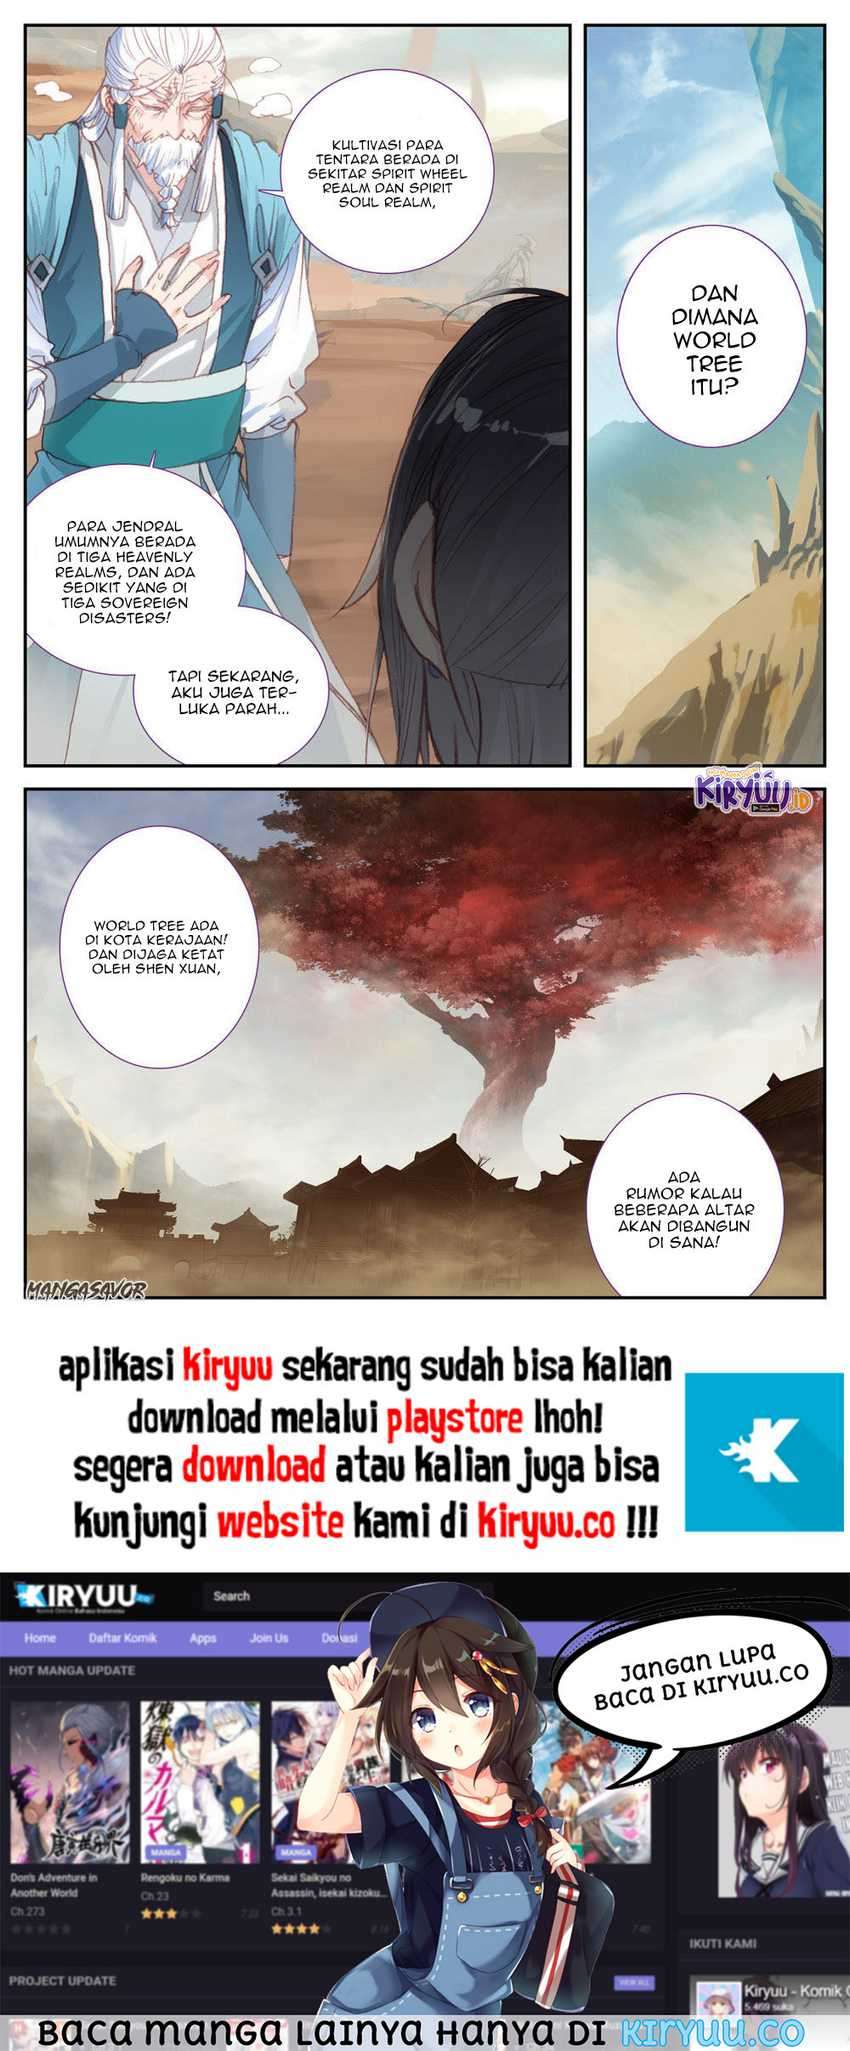 The Heaven List Chapter 84